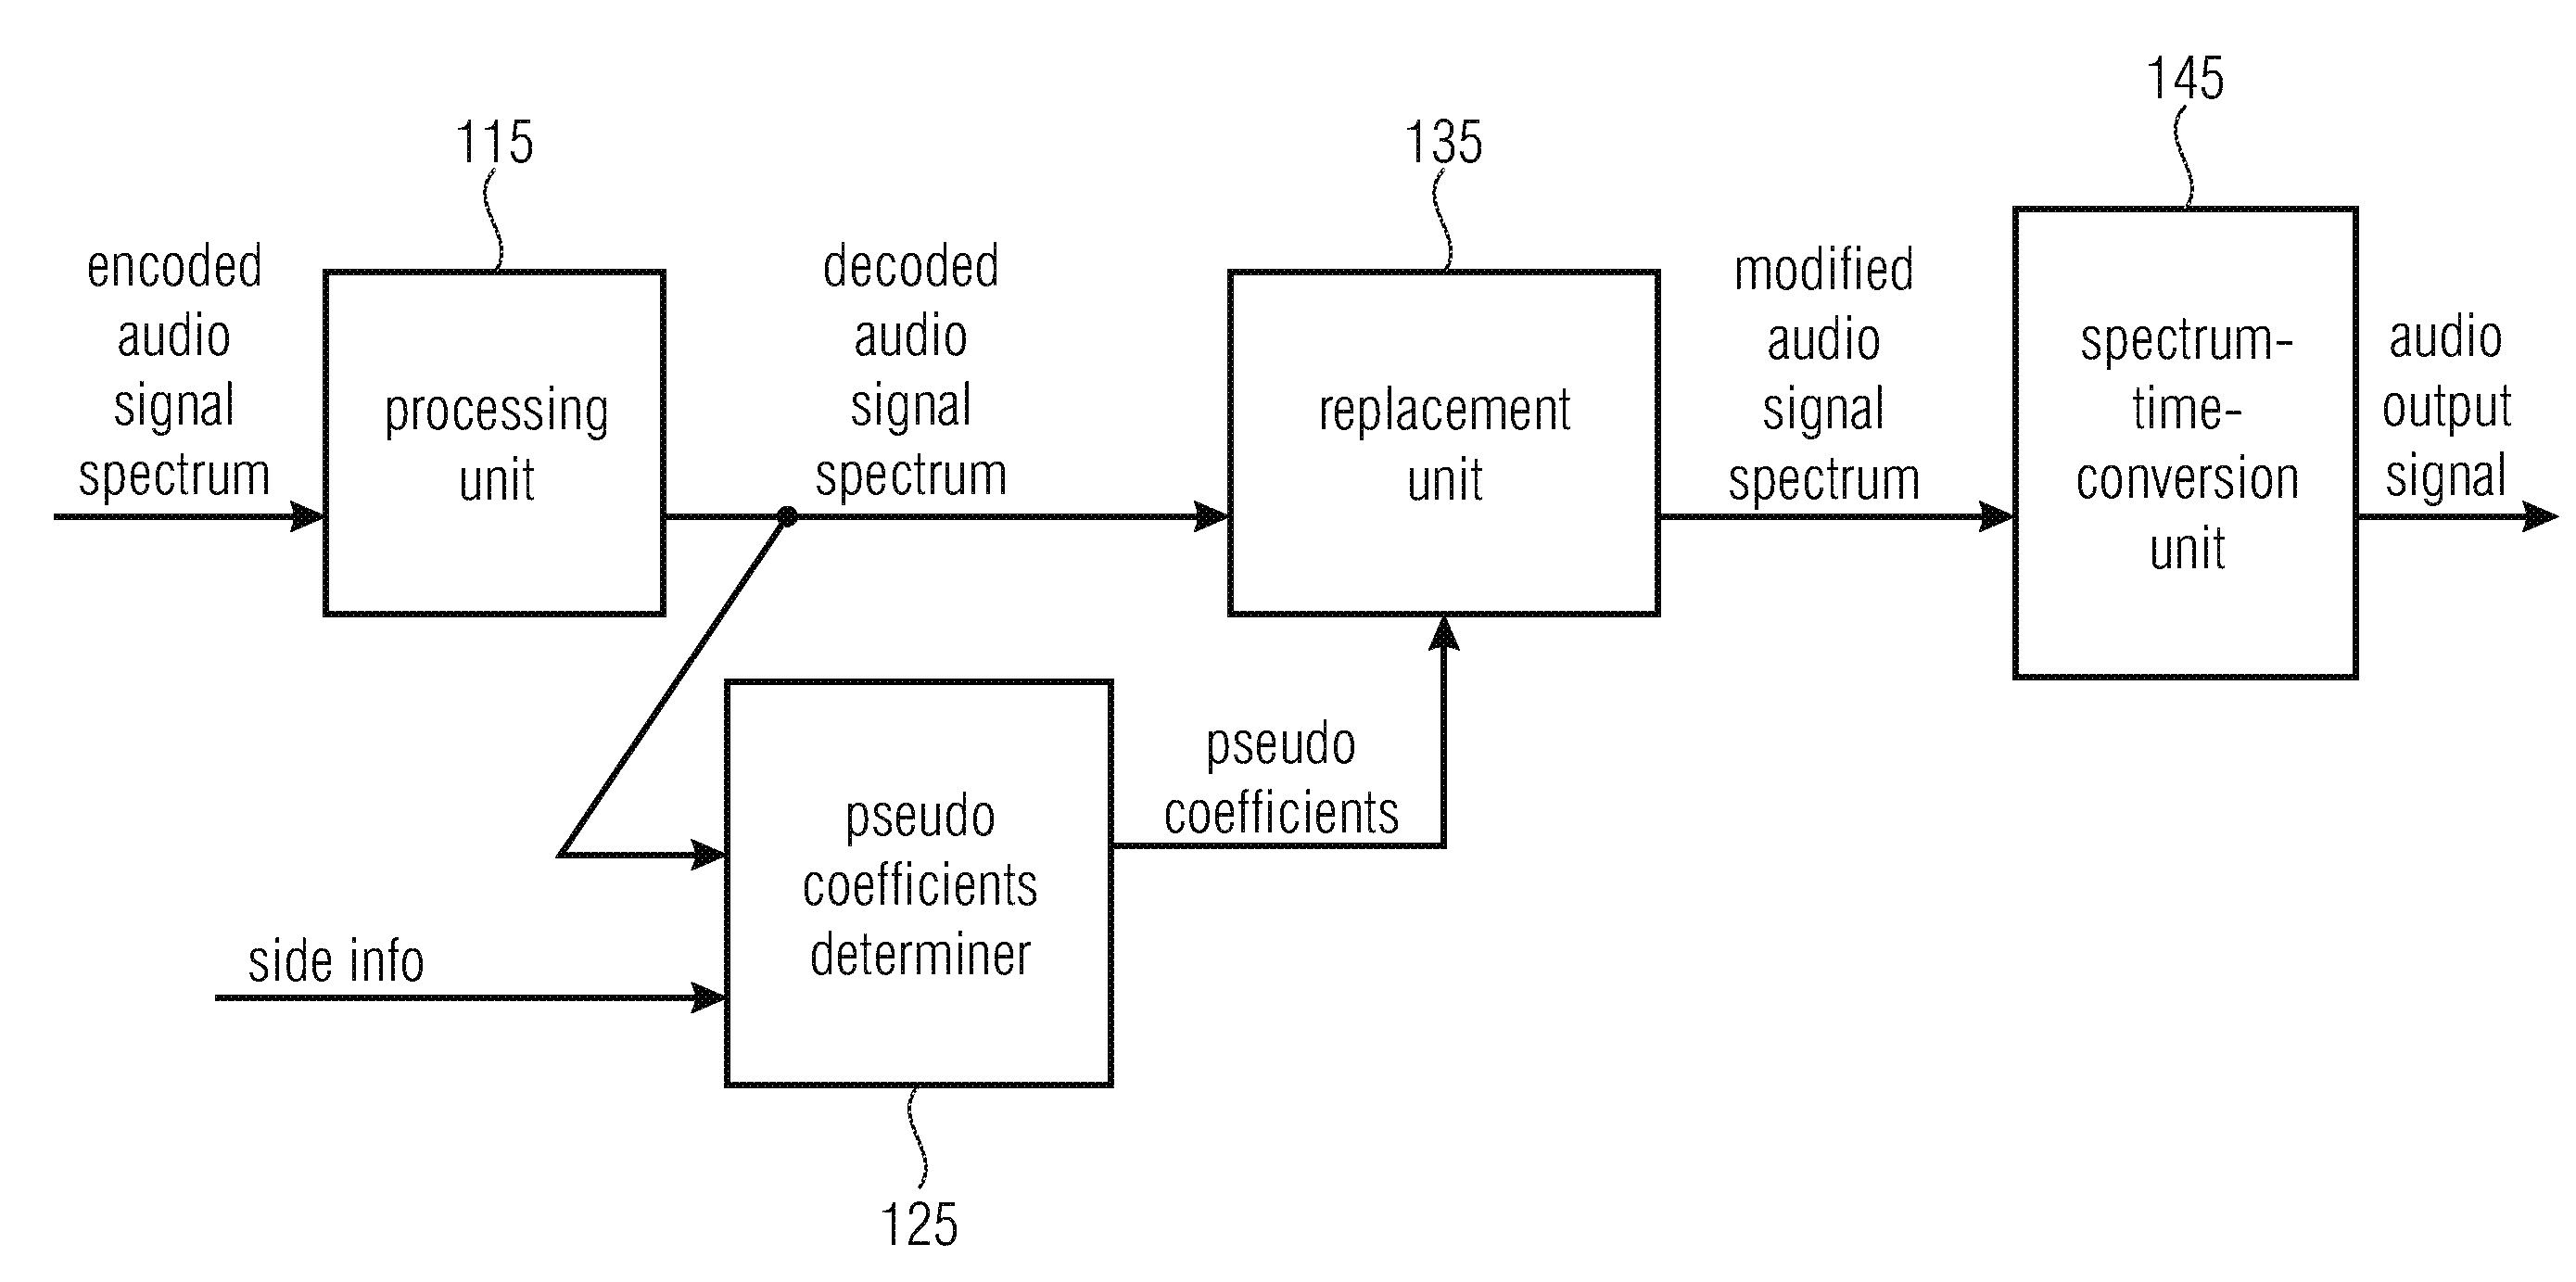 Apparatus and method for efficient synthesis of sinusoids and sweeps by employing spectral patterns